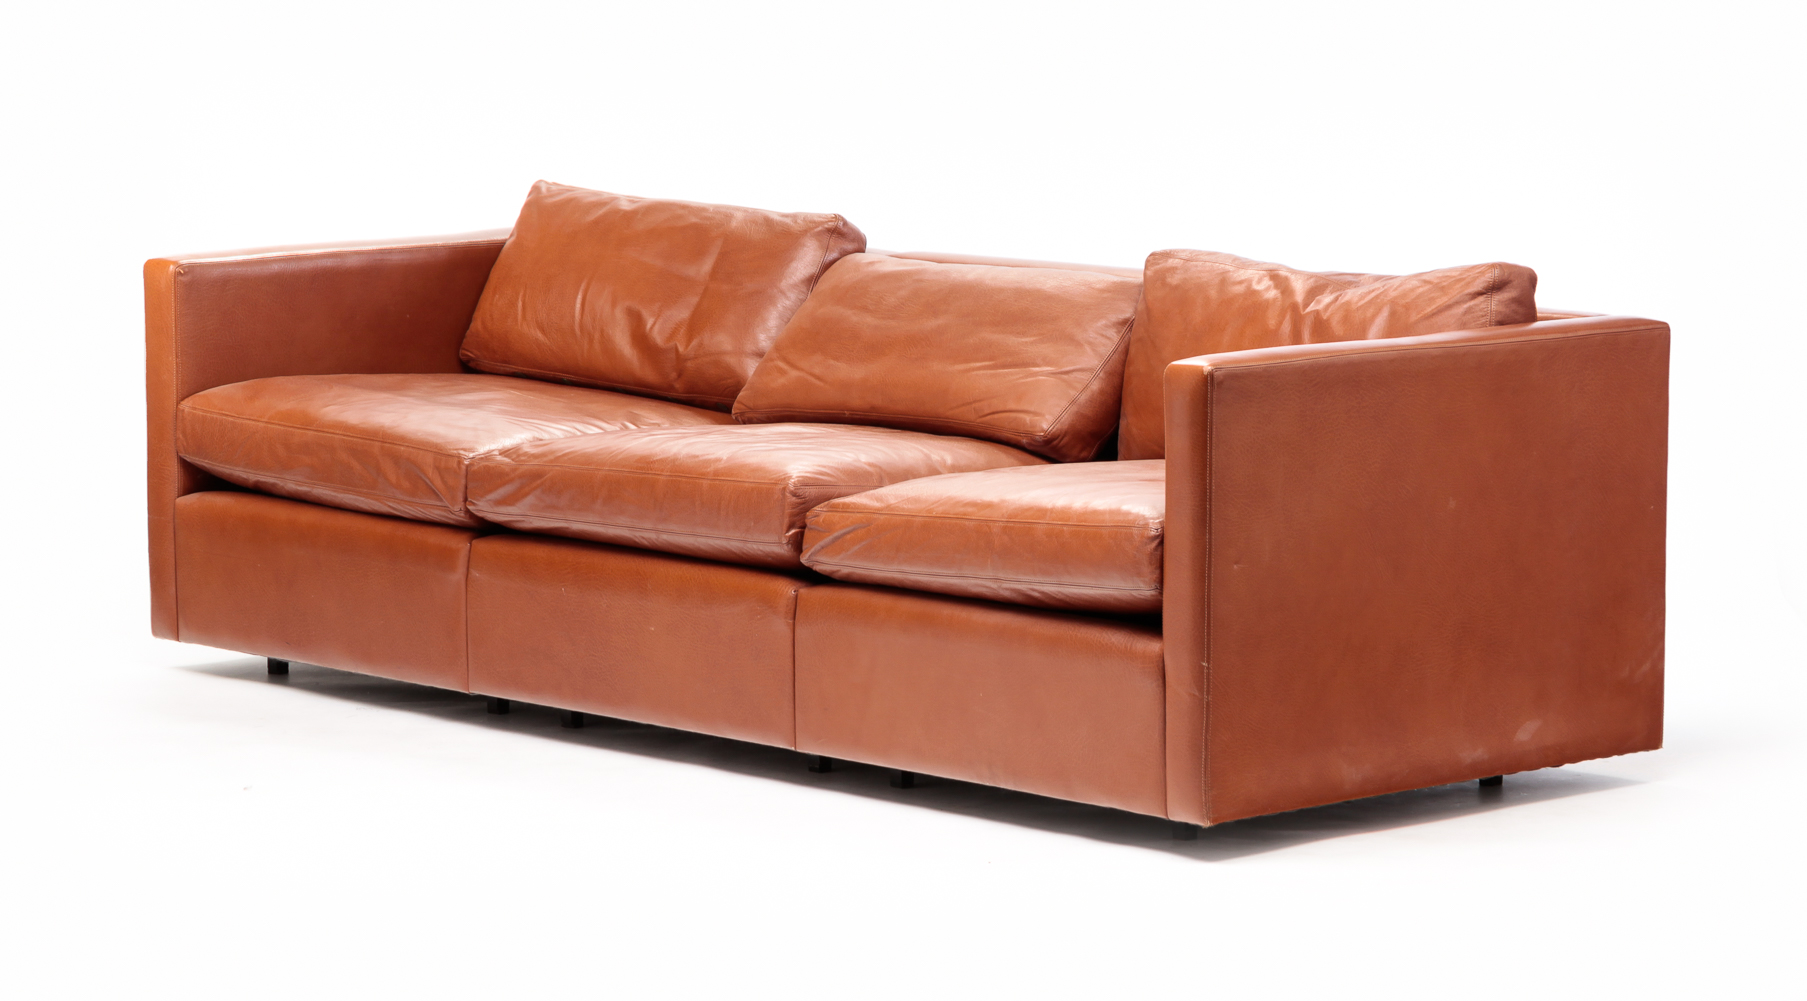 AMERICAN KNOLL LEATHER SOFA. Second